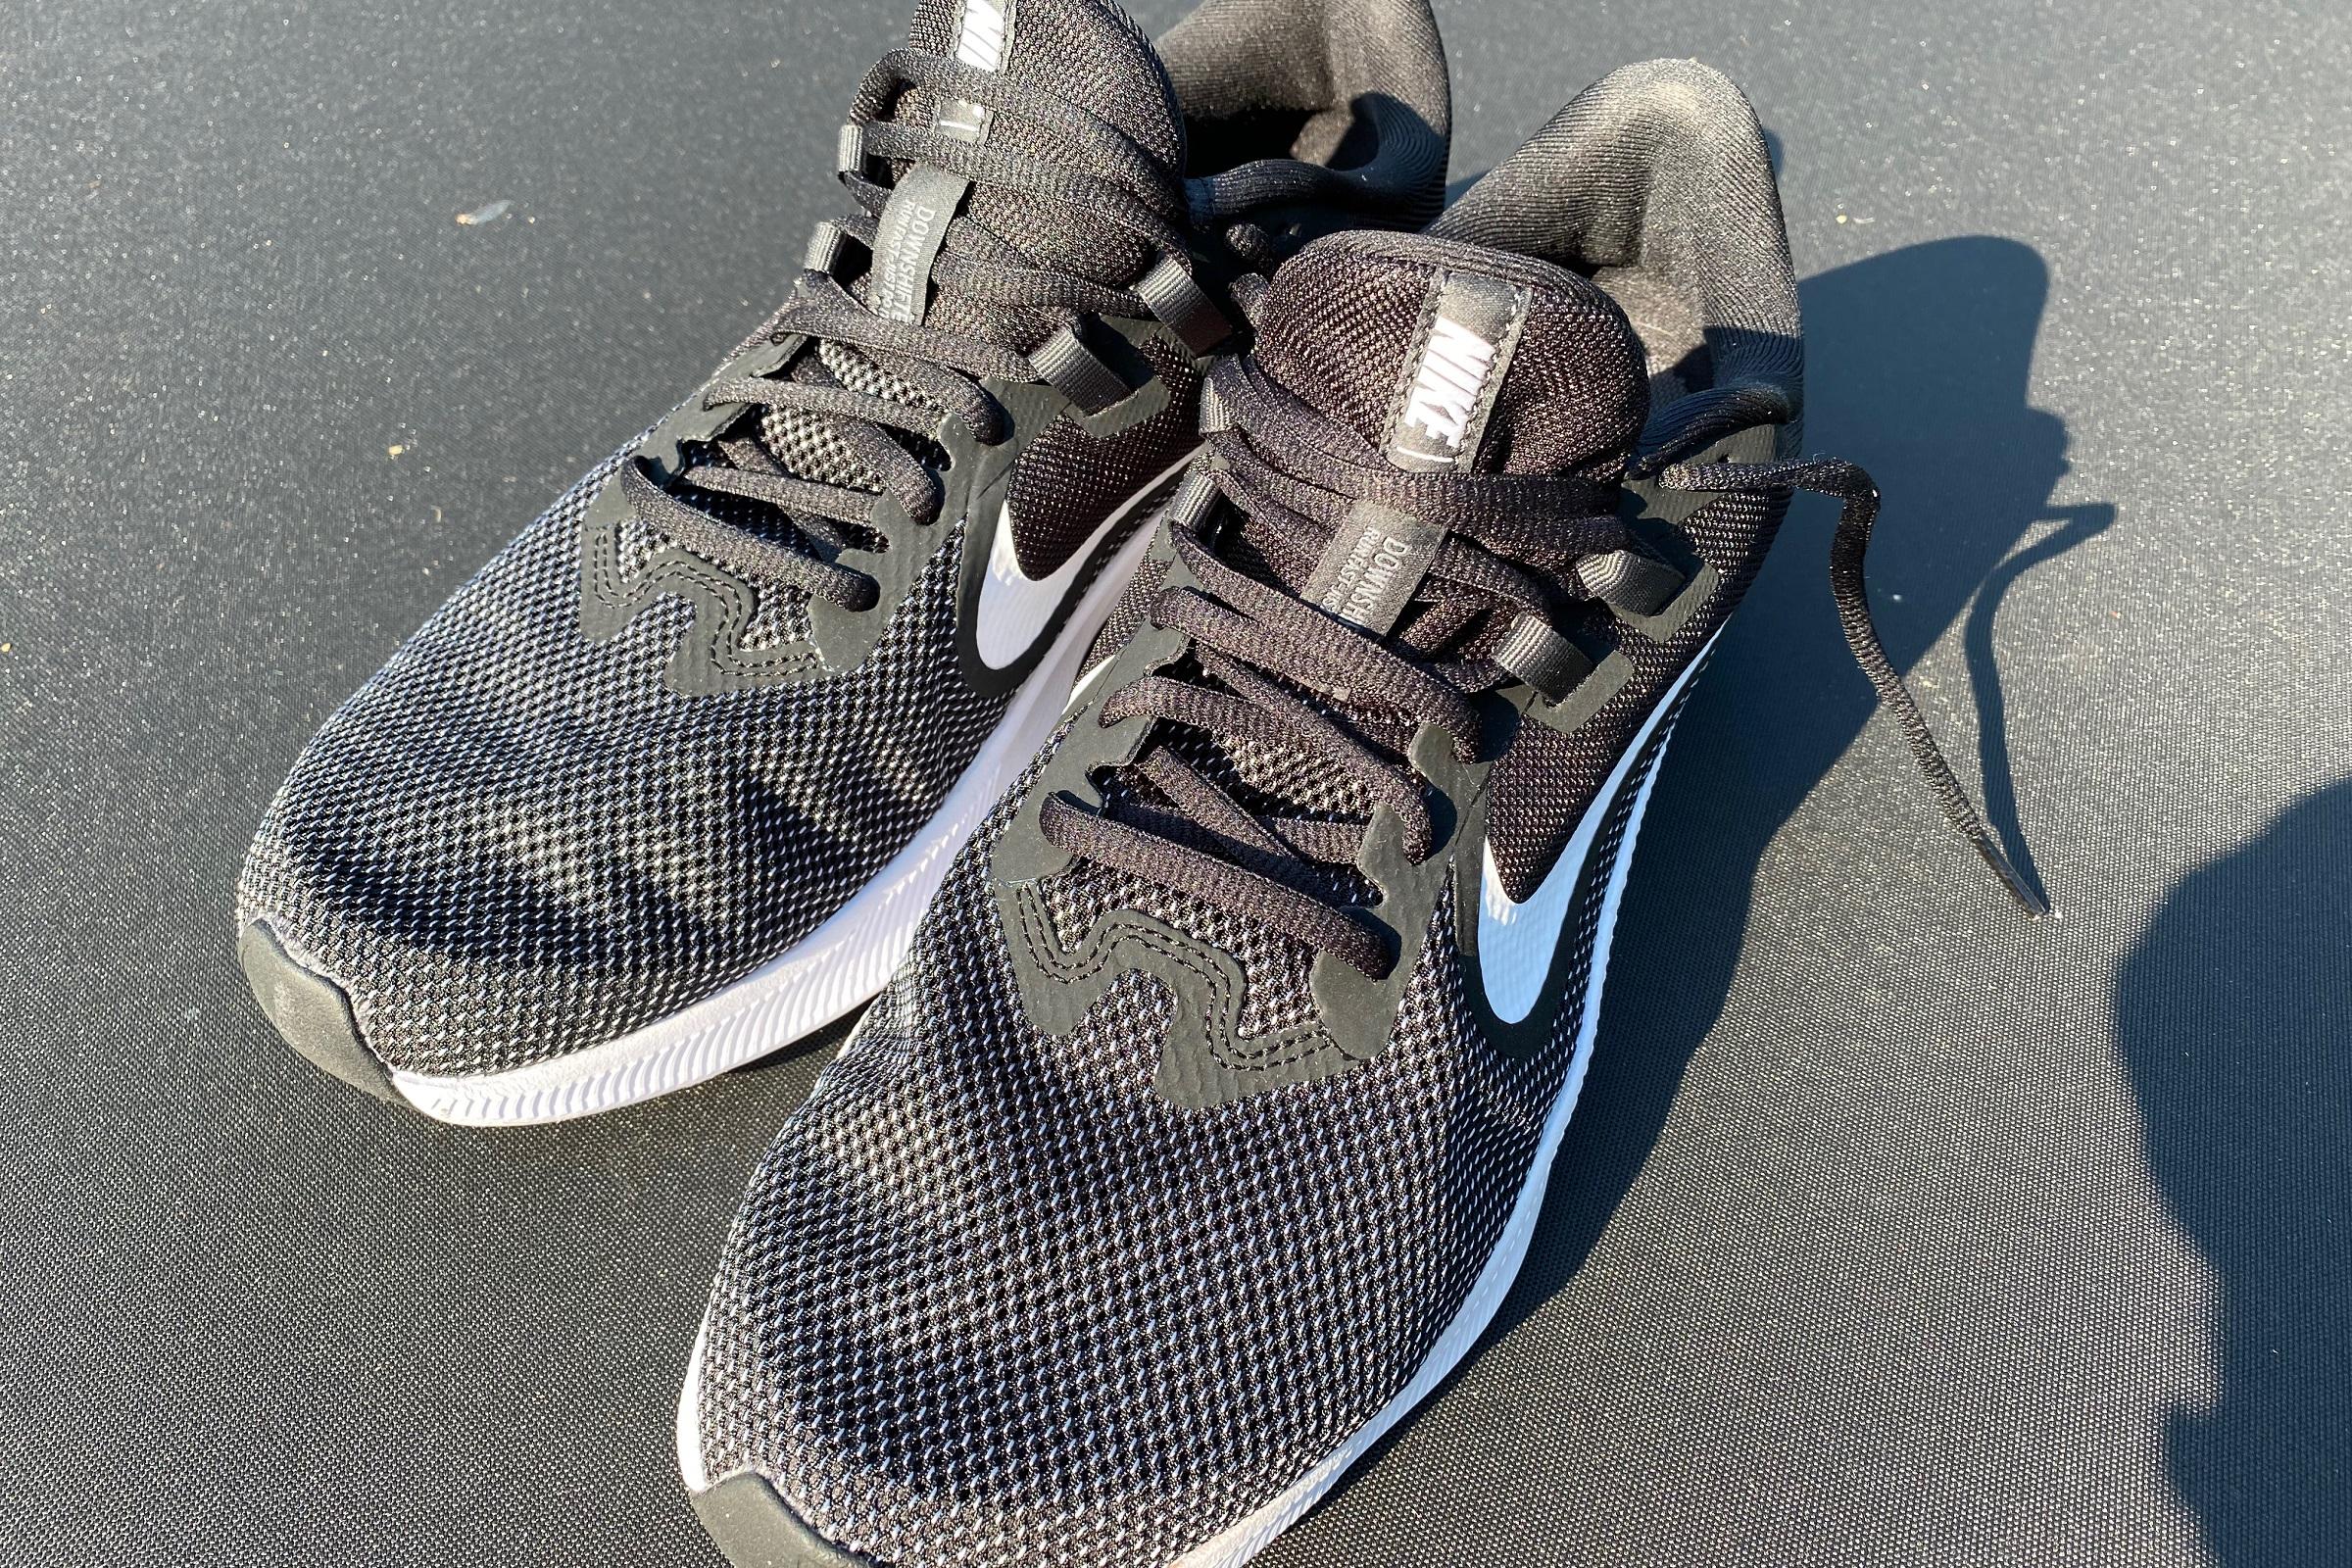 Nike Downshifter Review, Facts, Comparison | RunRepeat